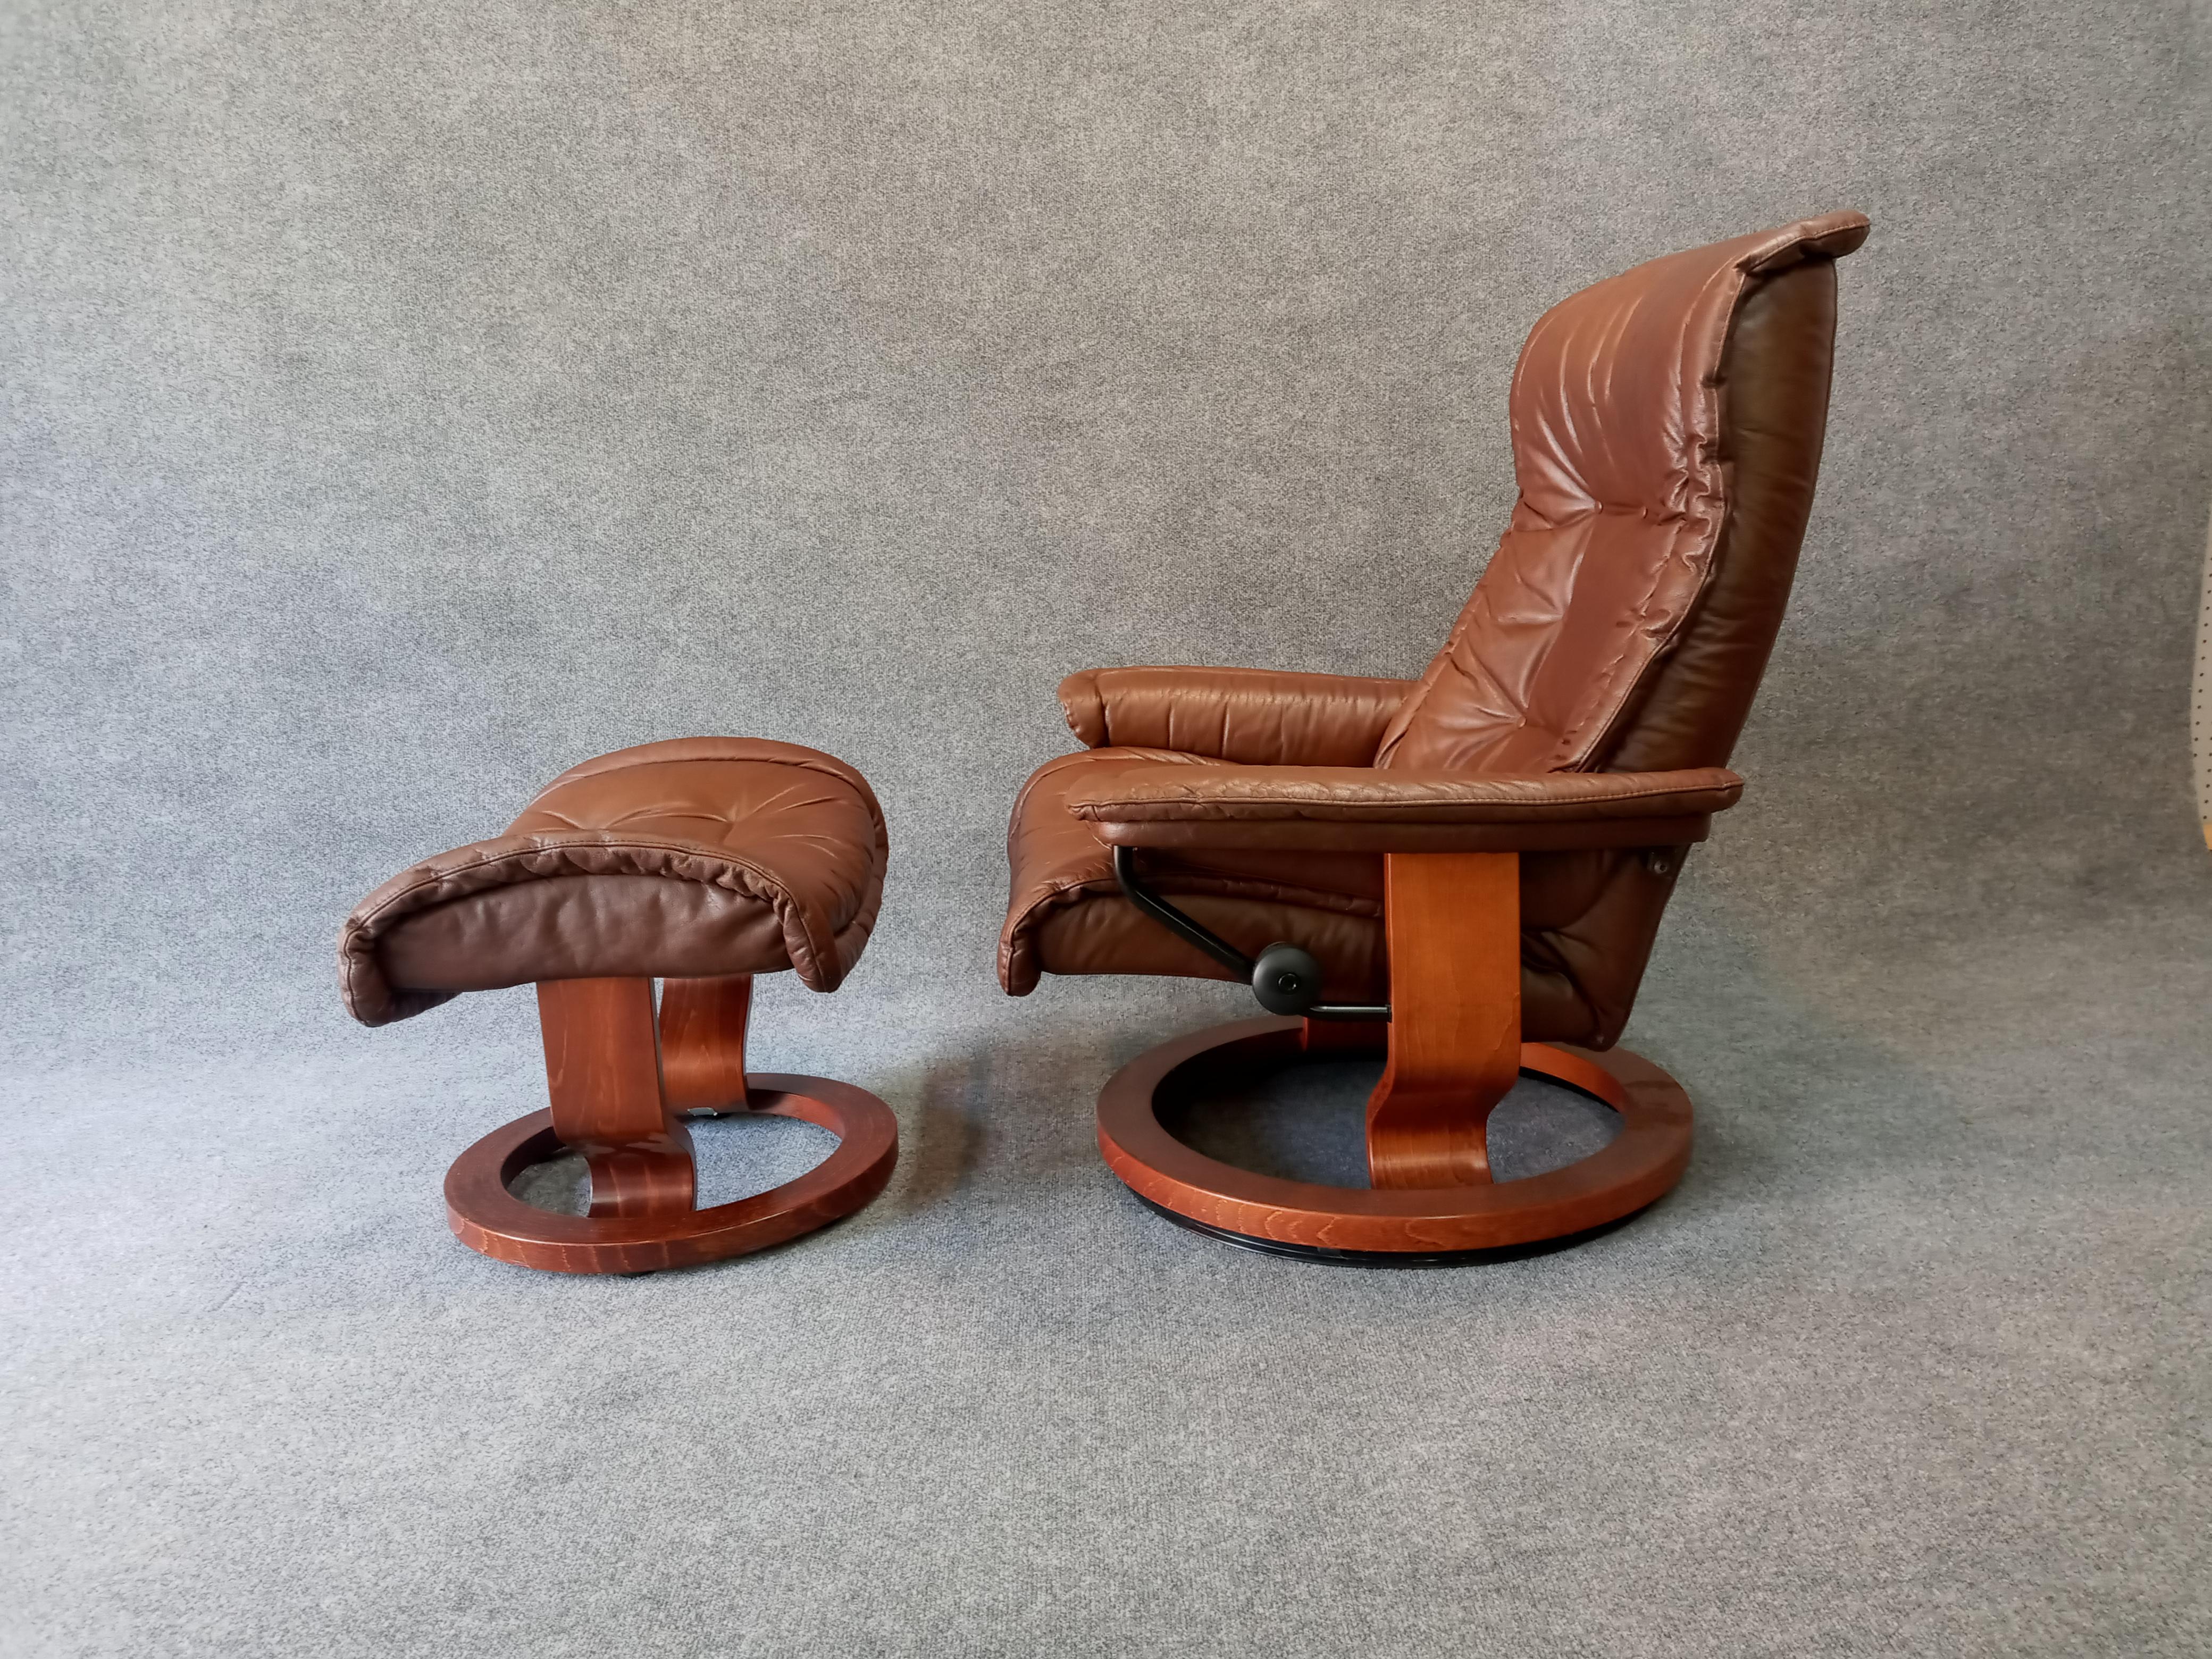 A vintage example of the modern classic reclining lounge chair and ottoman in tobacco brown leather with stained plywood base. Chair tilts and swivels. Ottoman retains original manufacturer label.

Very good vintage and original condition. No breaks